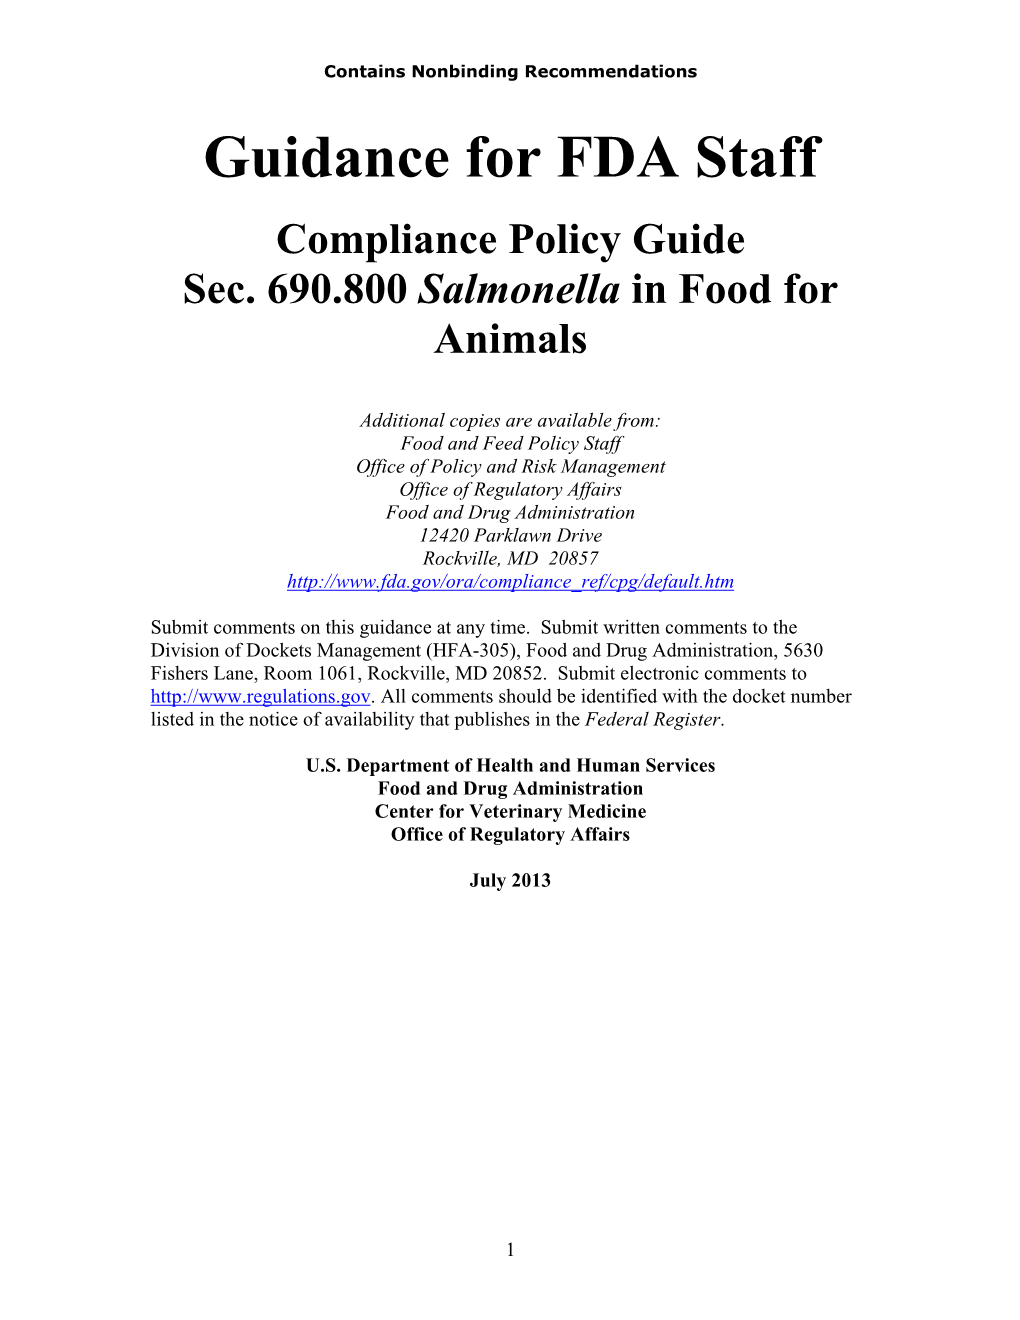 Compliance Policy Guide Sec. 690.800 Salmonella in Food for Animals